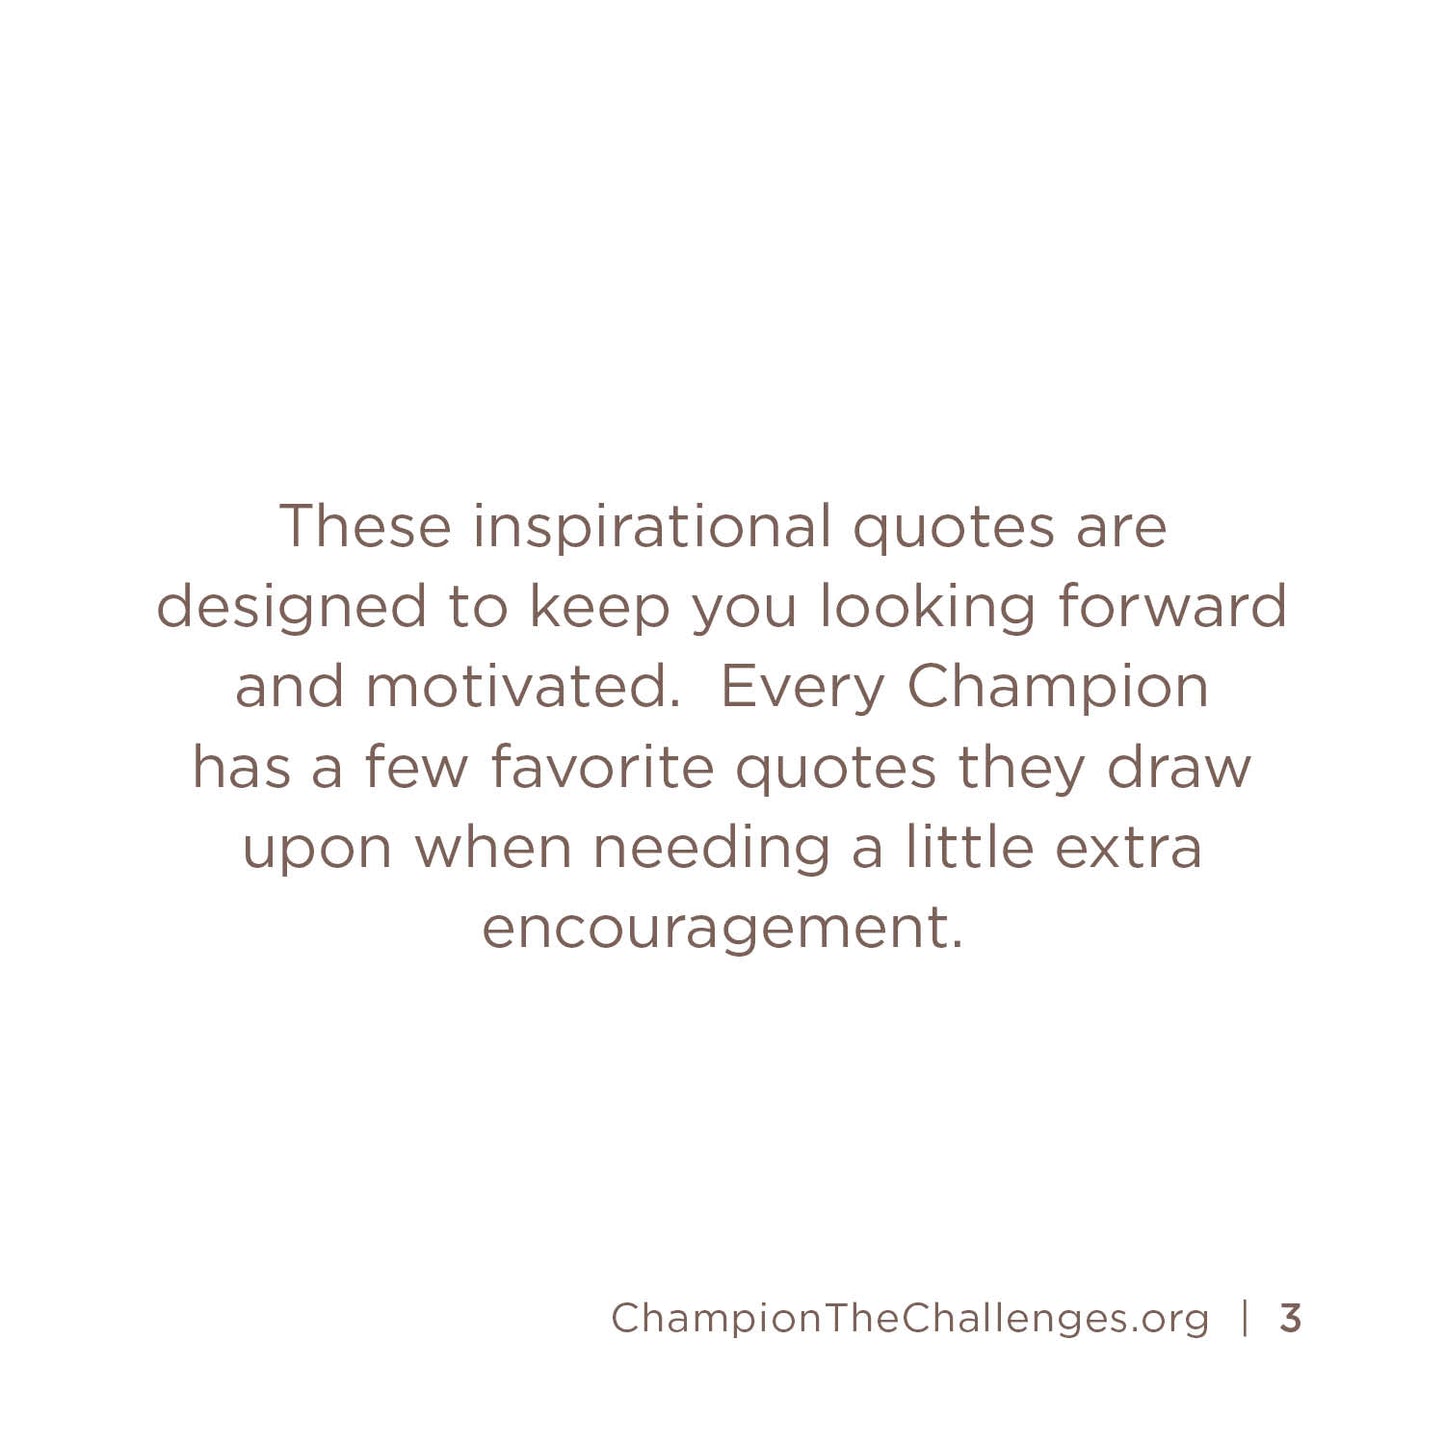 Quotes of Inspiration